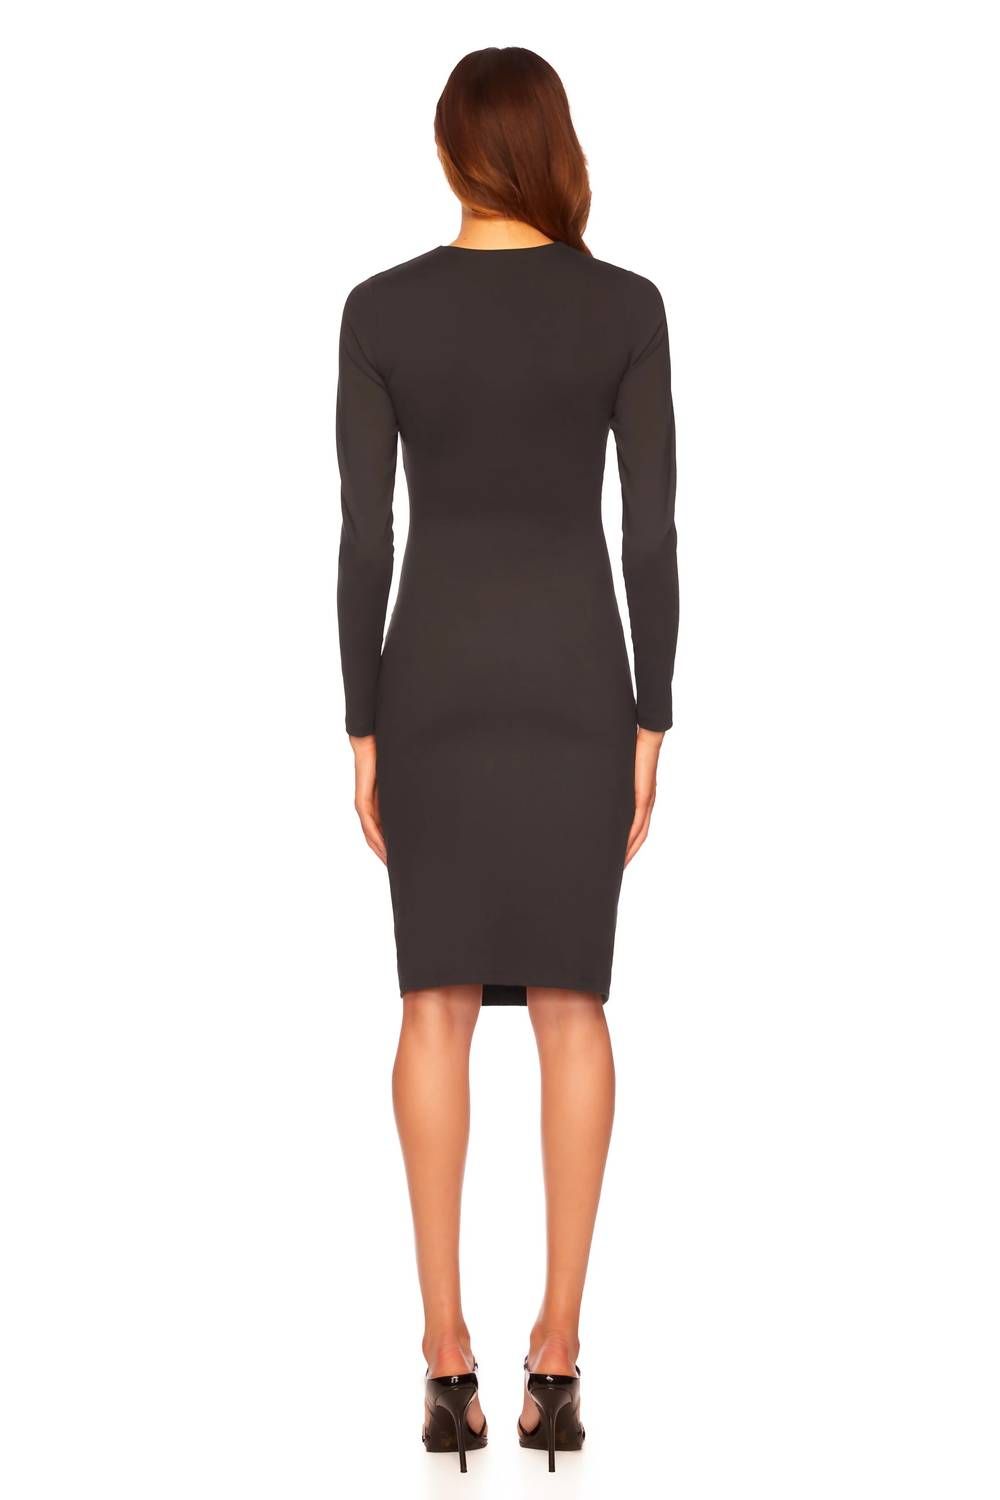 Style 1-3046134918-3236 Susana Monaco Size S Long Sleeve Black Cocktail Dress on Queenly